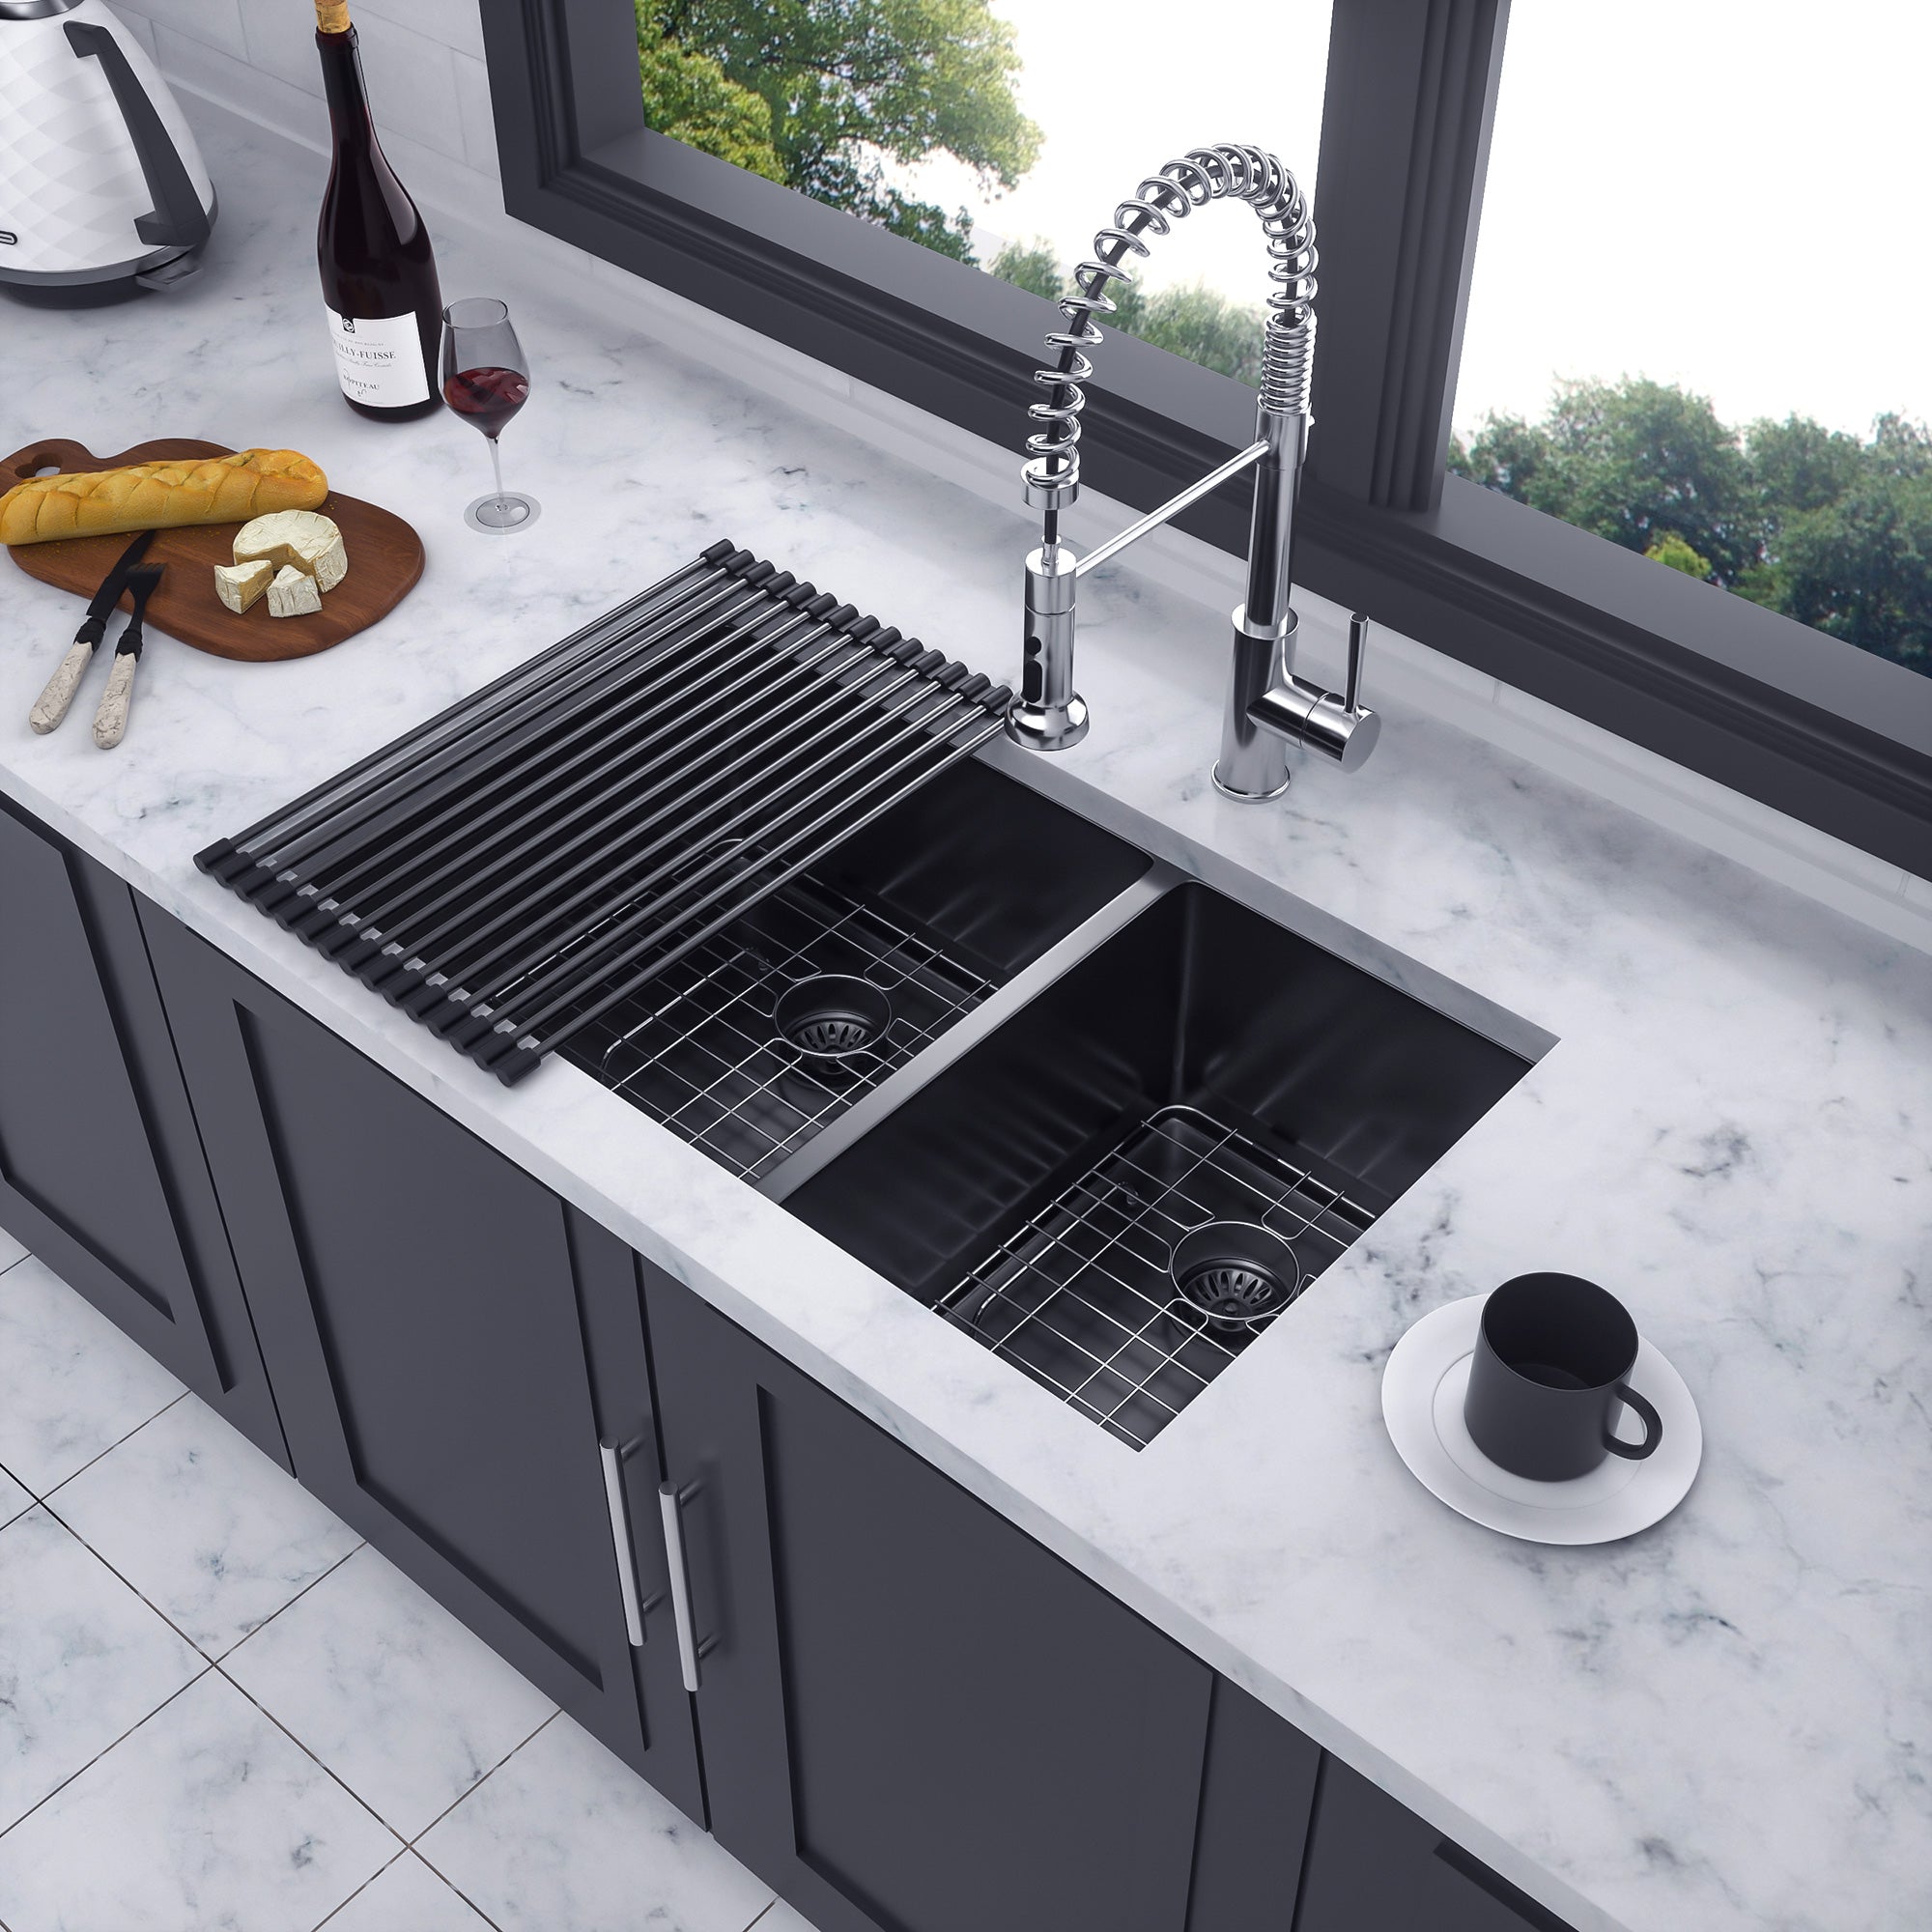 Undermount Double Bowl Stainless Steel Kitchen Sink RX-SS31